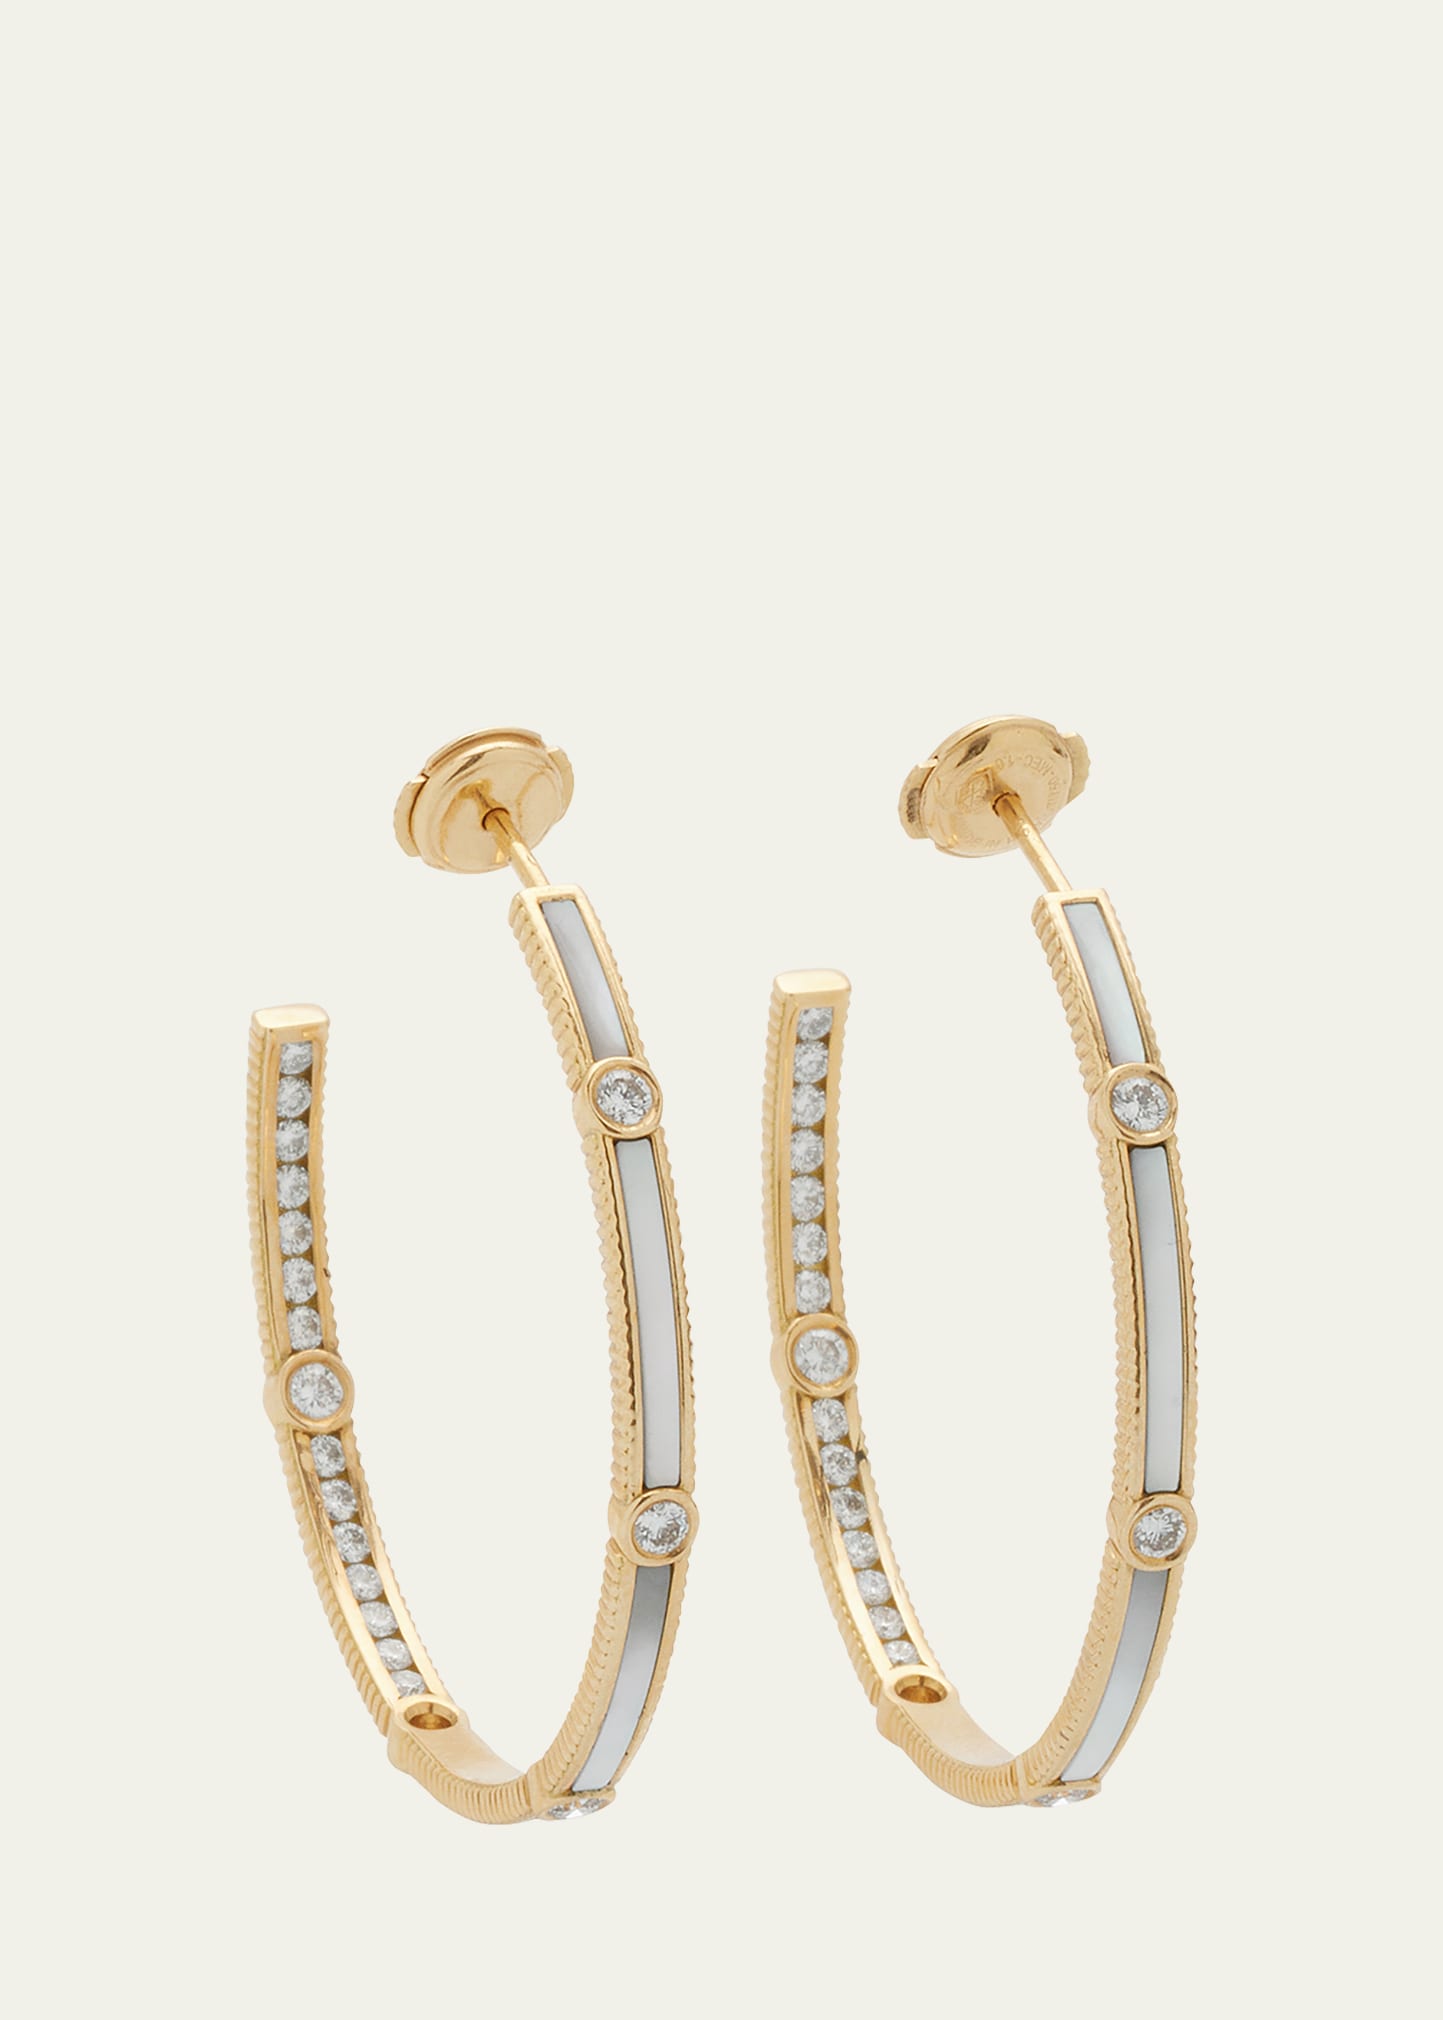 Rayon Extra-Large Mother-of-Pearl Hoop Earrings with 18K Yellow Gold and Diamonds